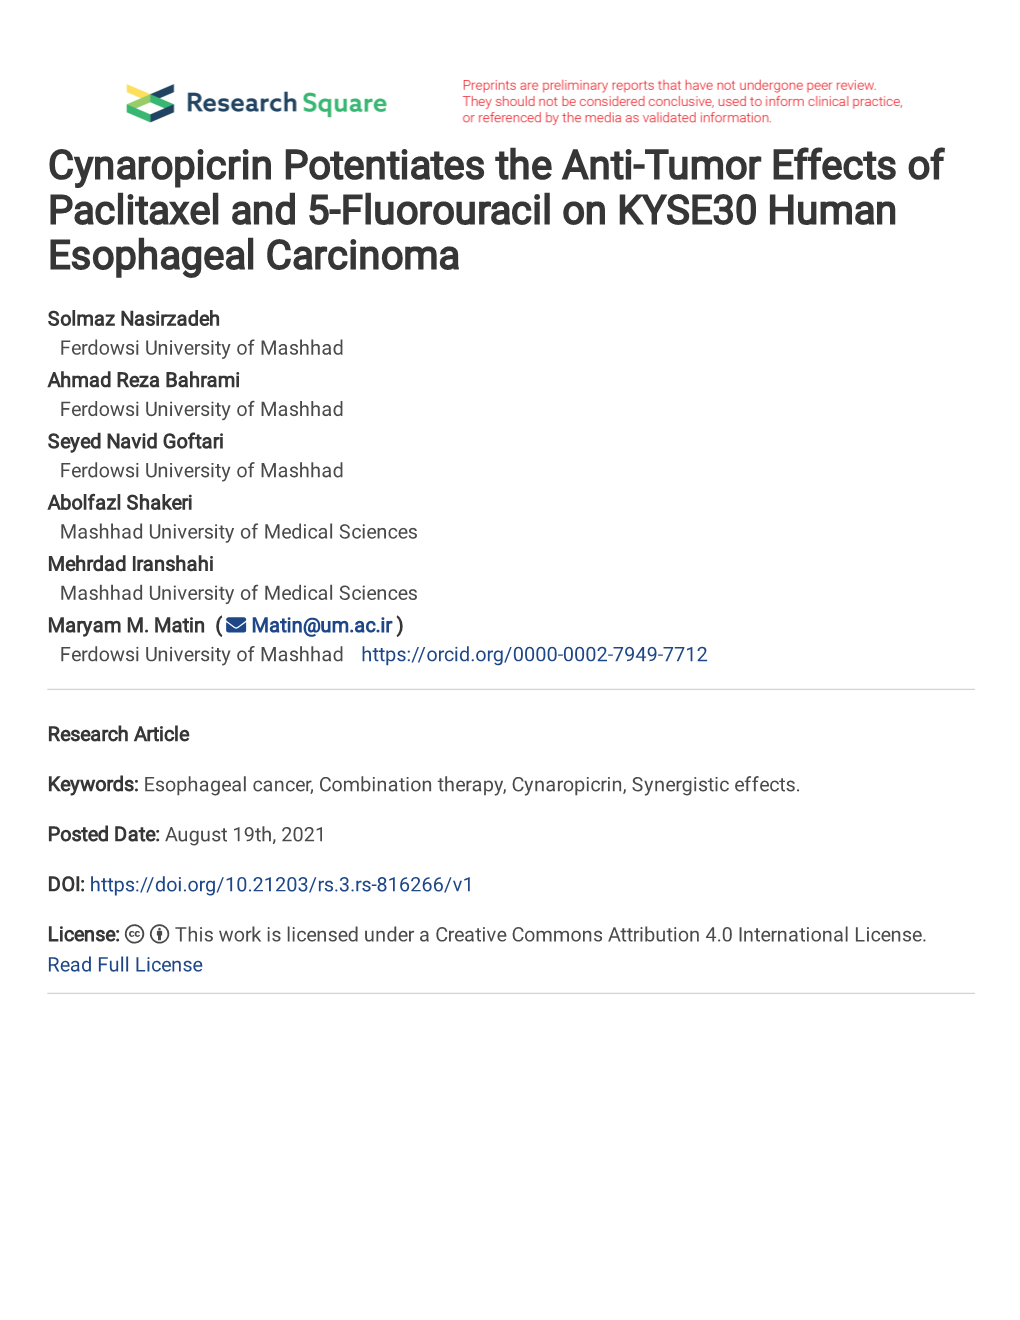 Cynaropicrin Potentiates the Anti-Tumor Effects of Paclitaxel and 5-Fluorouracil on KYSE30 Human Esophageal Carcinoma